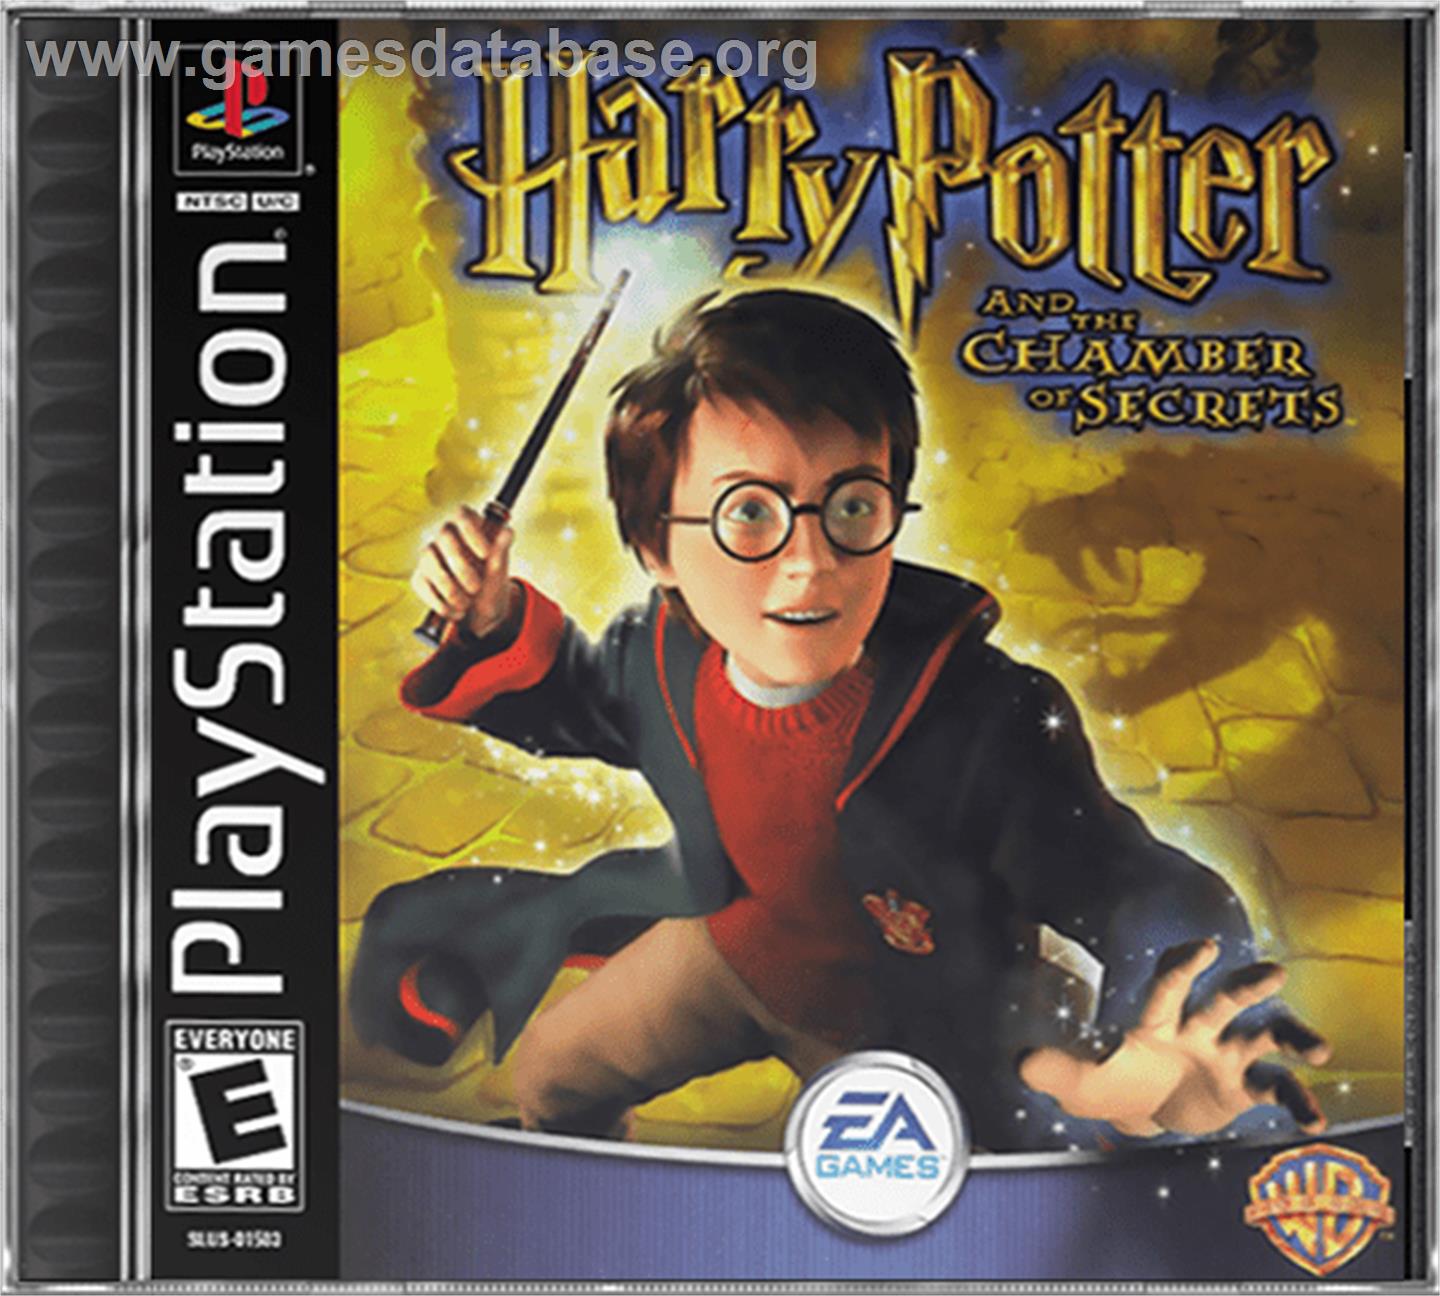 Harry Potter and the Chamber of Secrets - Sony Playstation - Artwork - Box